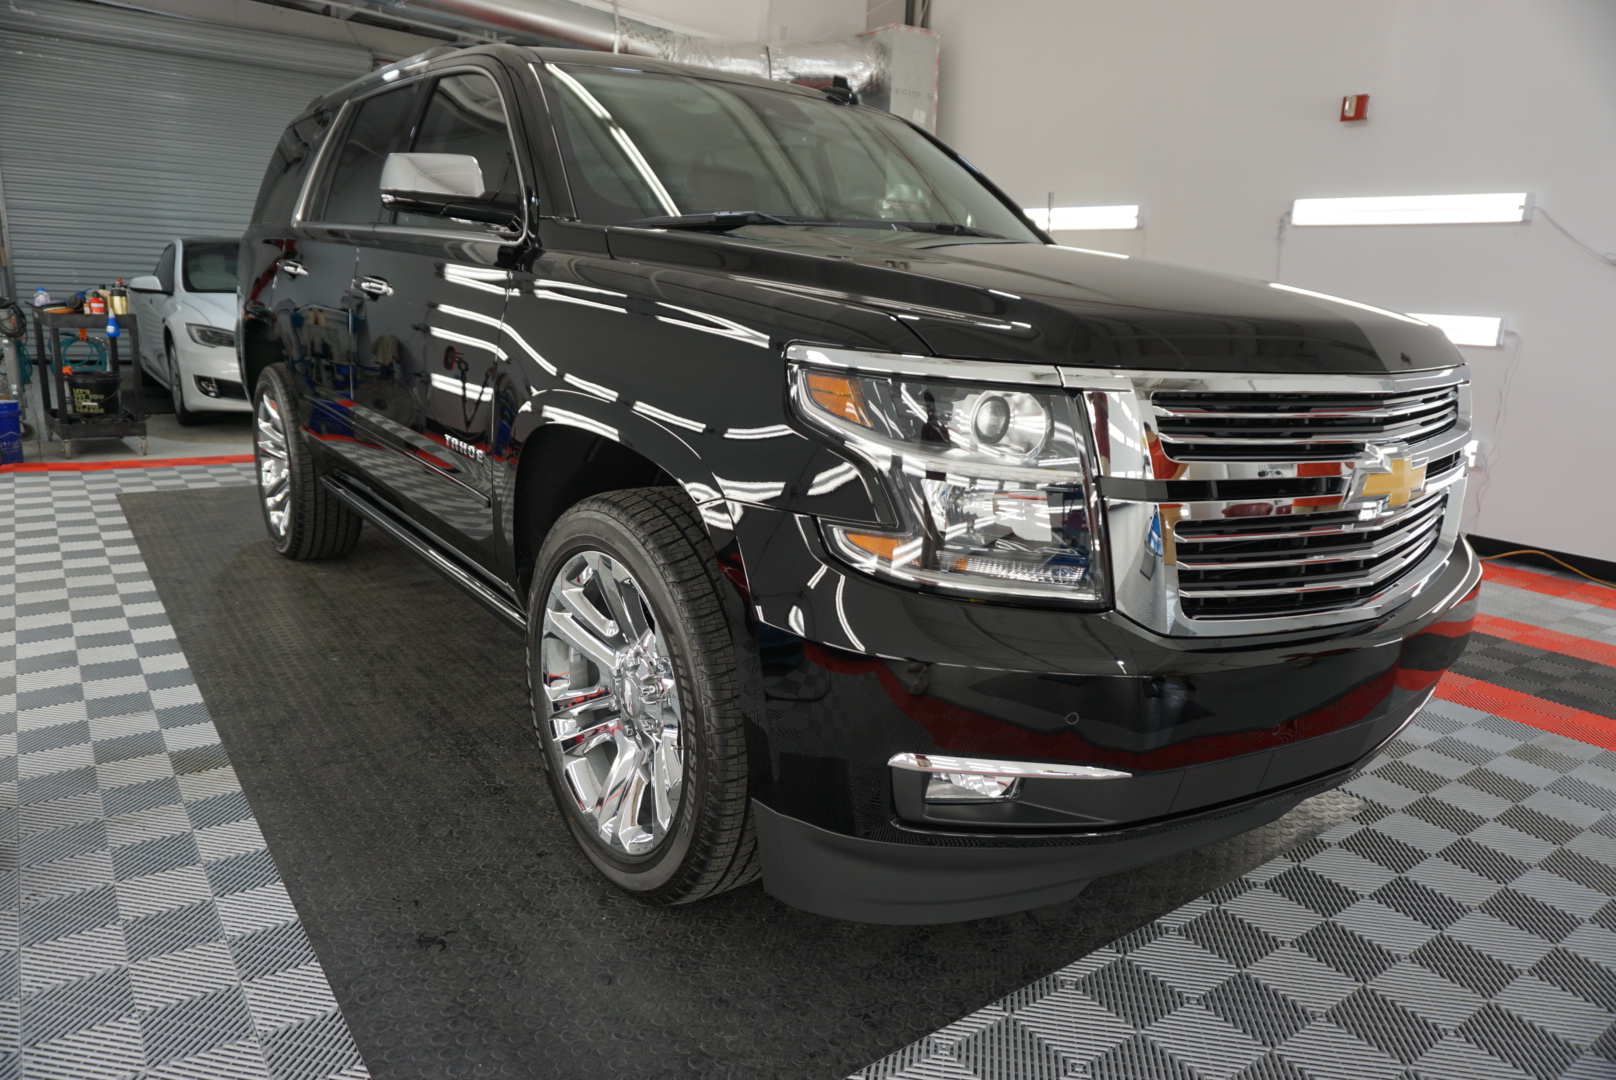 New Car Preparation of a 2020 Chevrolet Tahoe